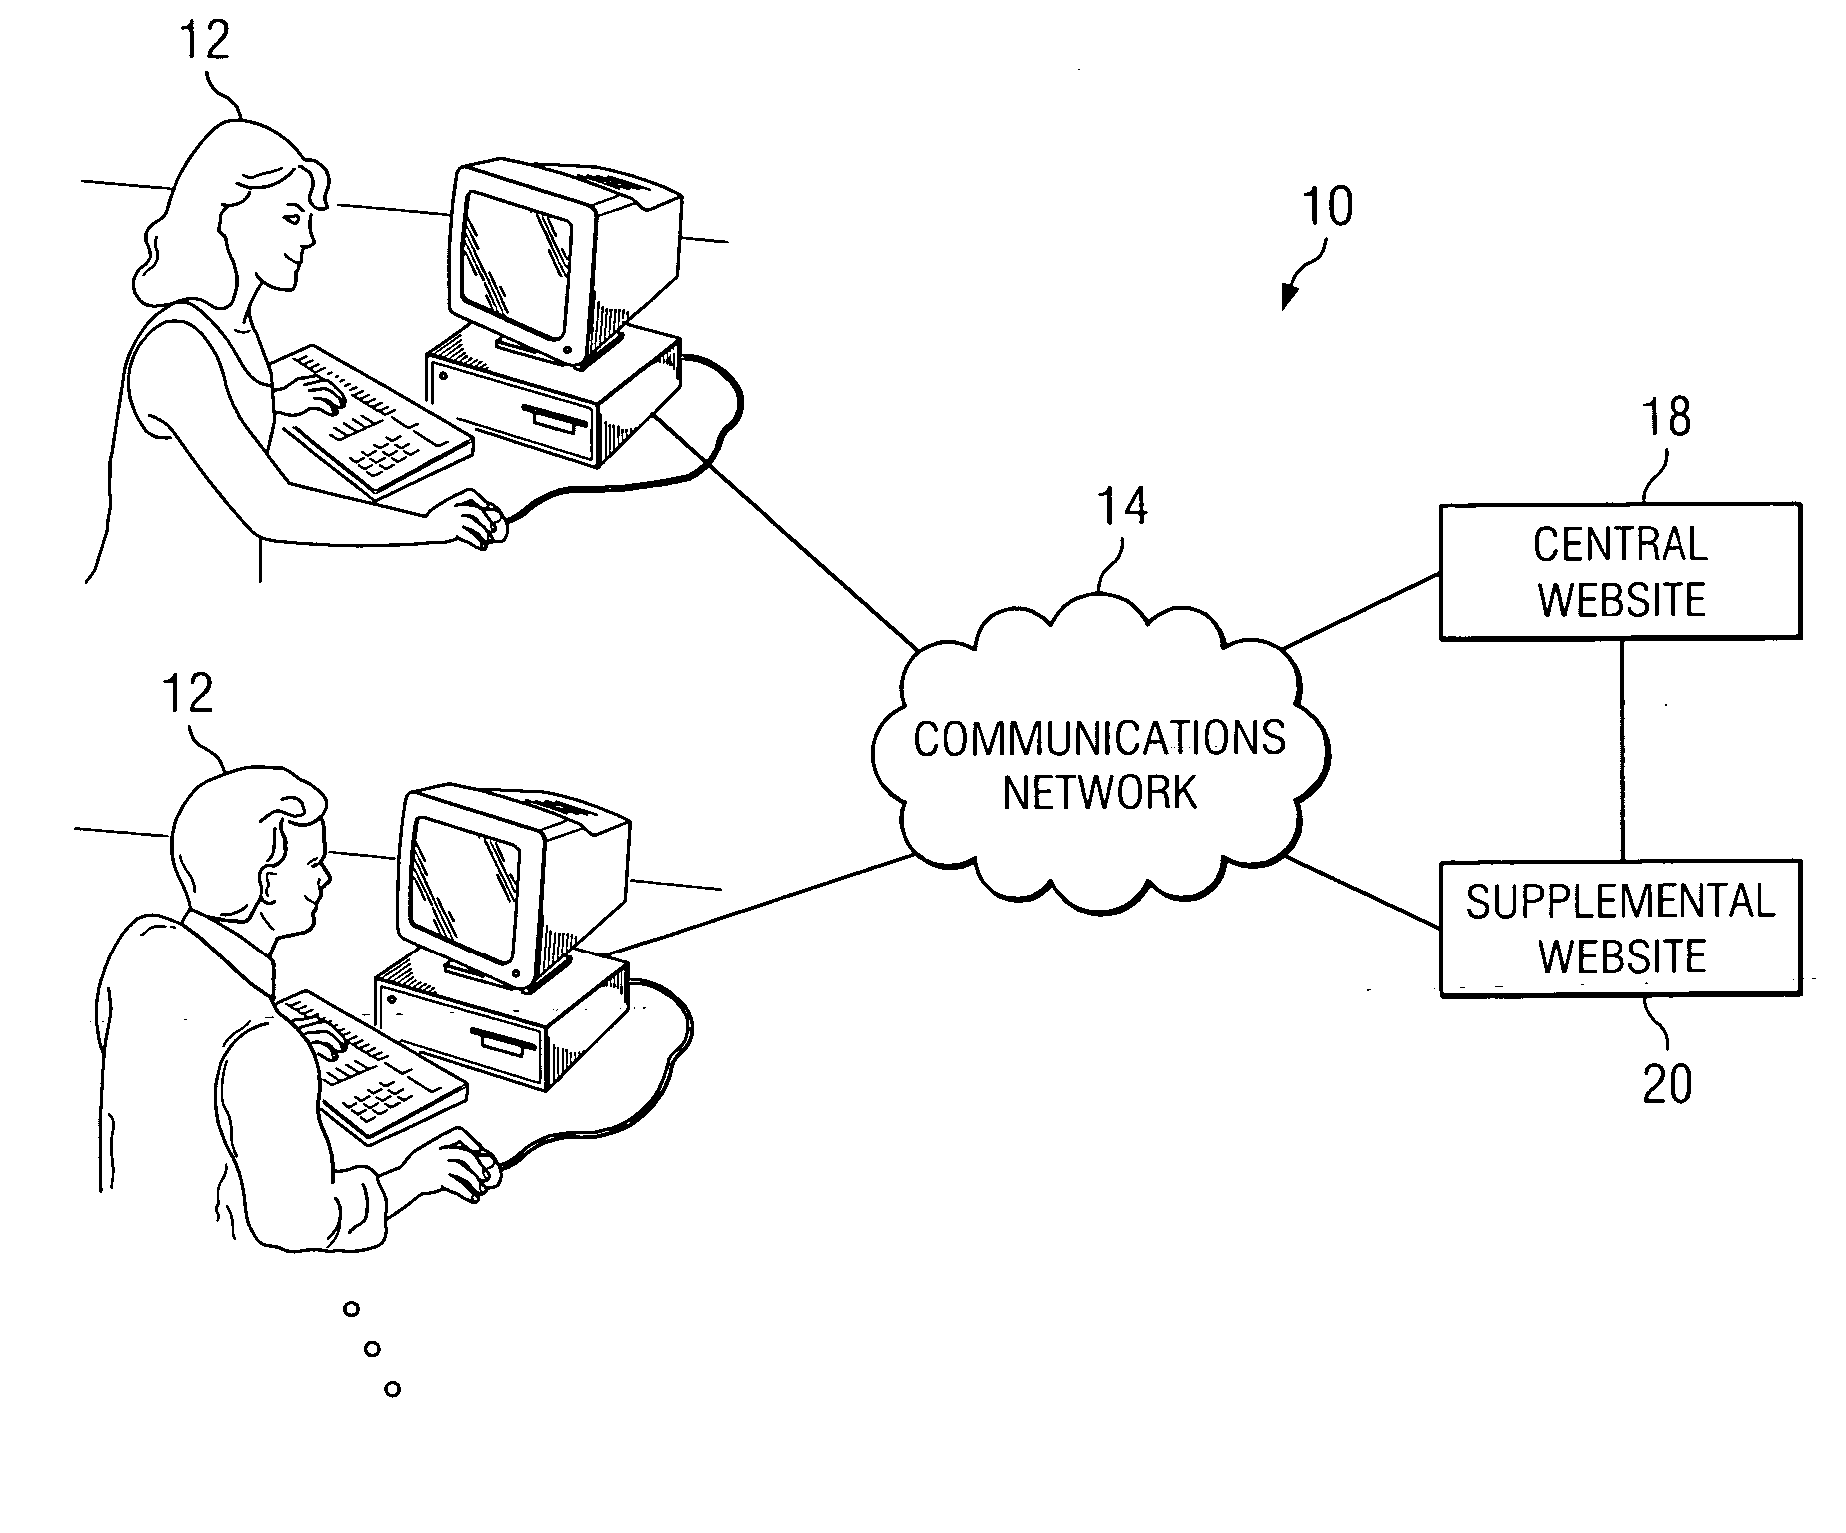 System and method for providing a system that includes on-line and off-line features in a network environment